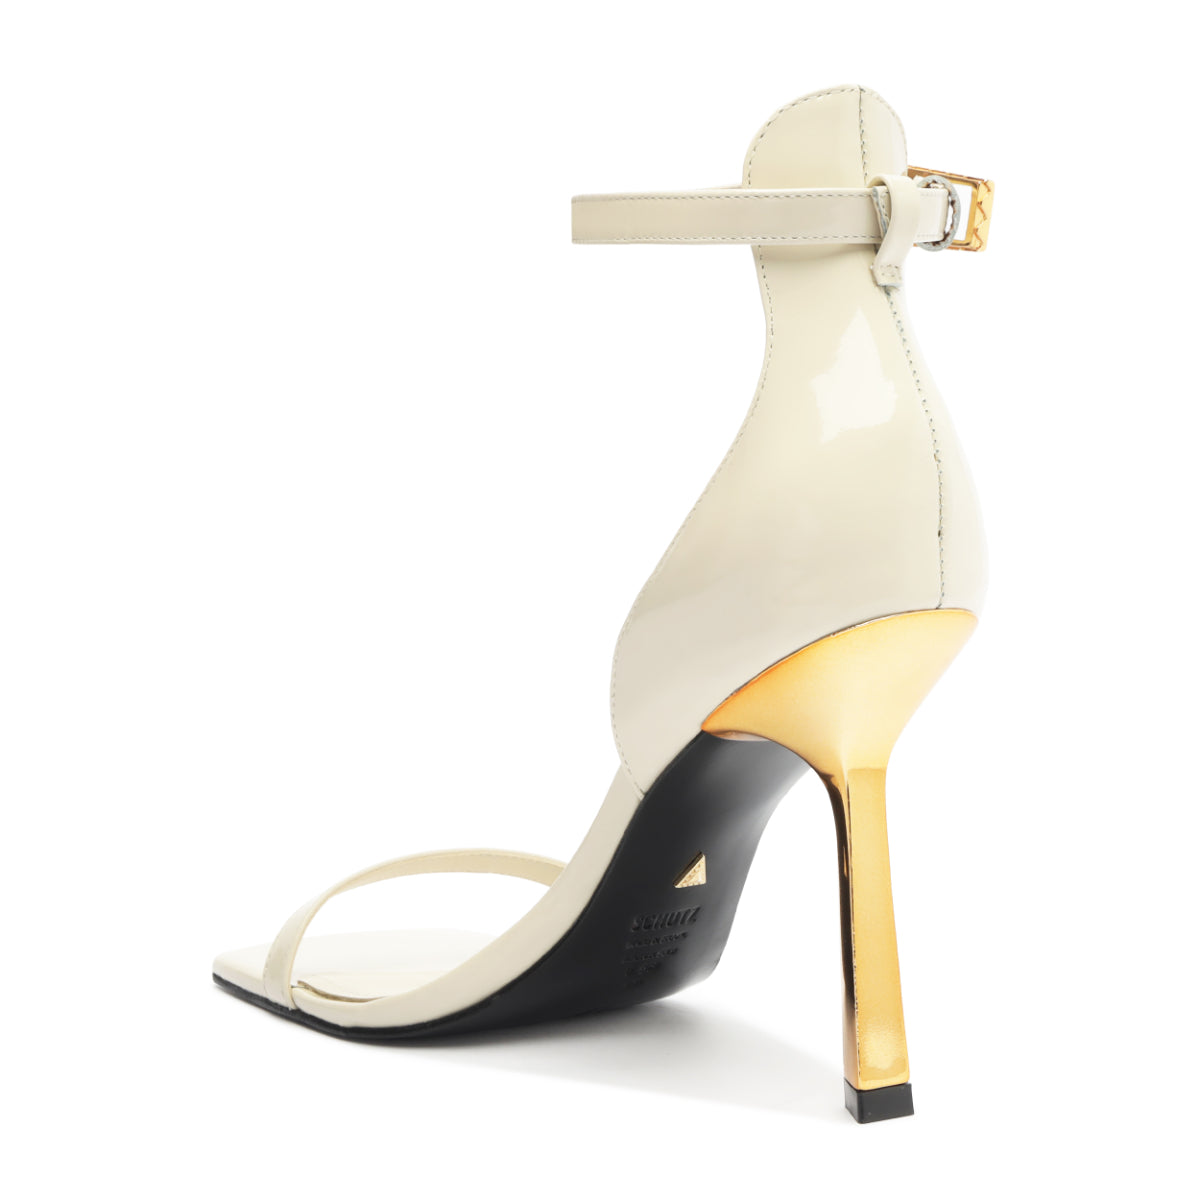 Ciara Patent Leather Sandal in White